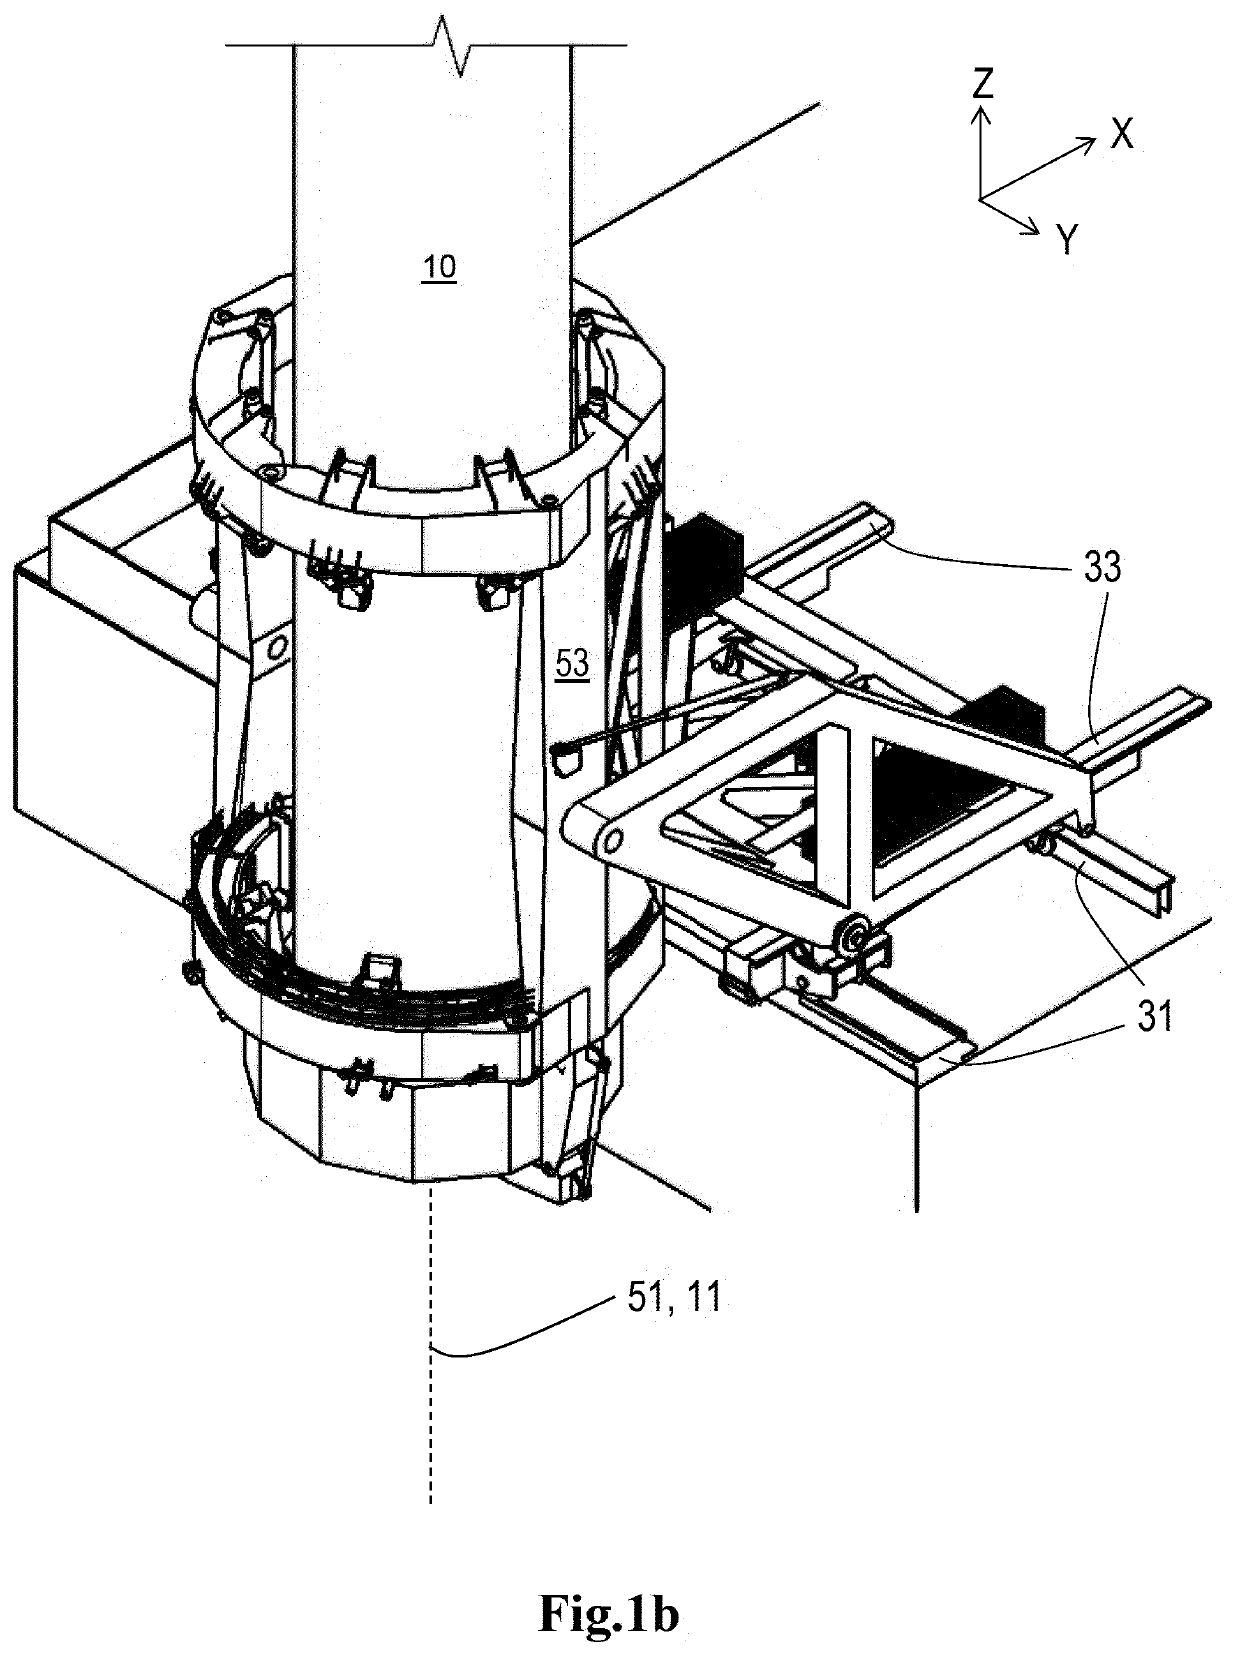 A pile upending and holding system and method